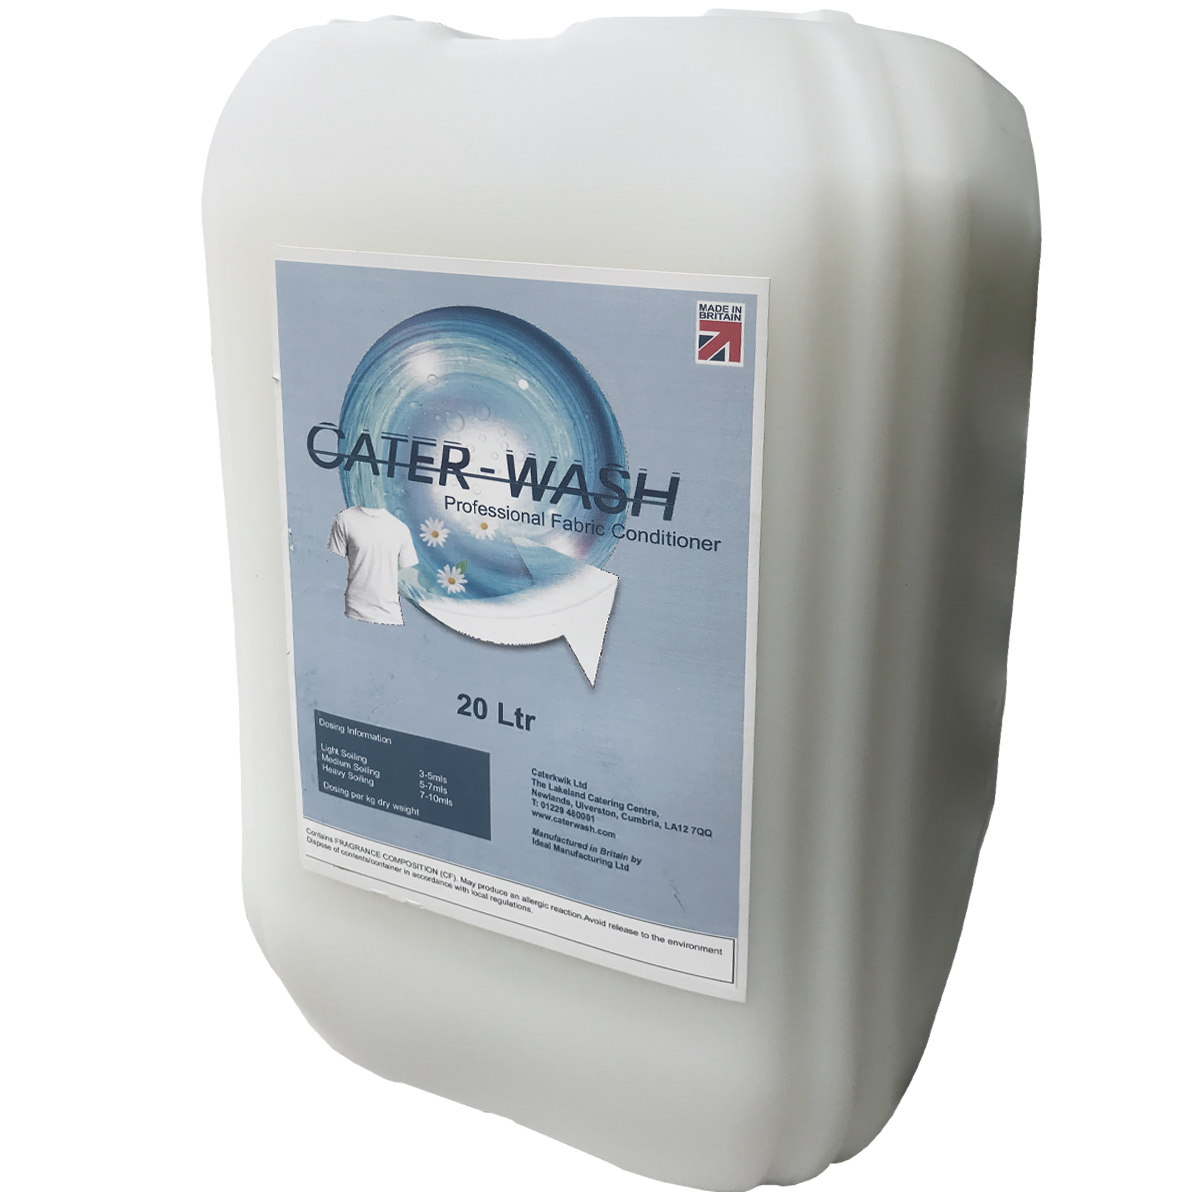 Cater-Wash 20L Cotton Soft Commercial Fabric Softener - CK6402